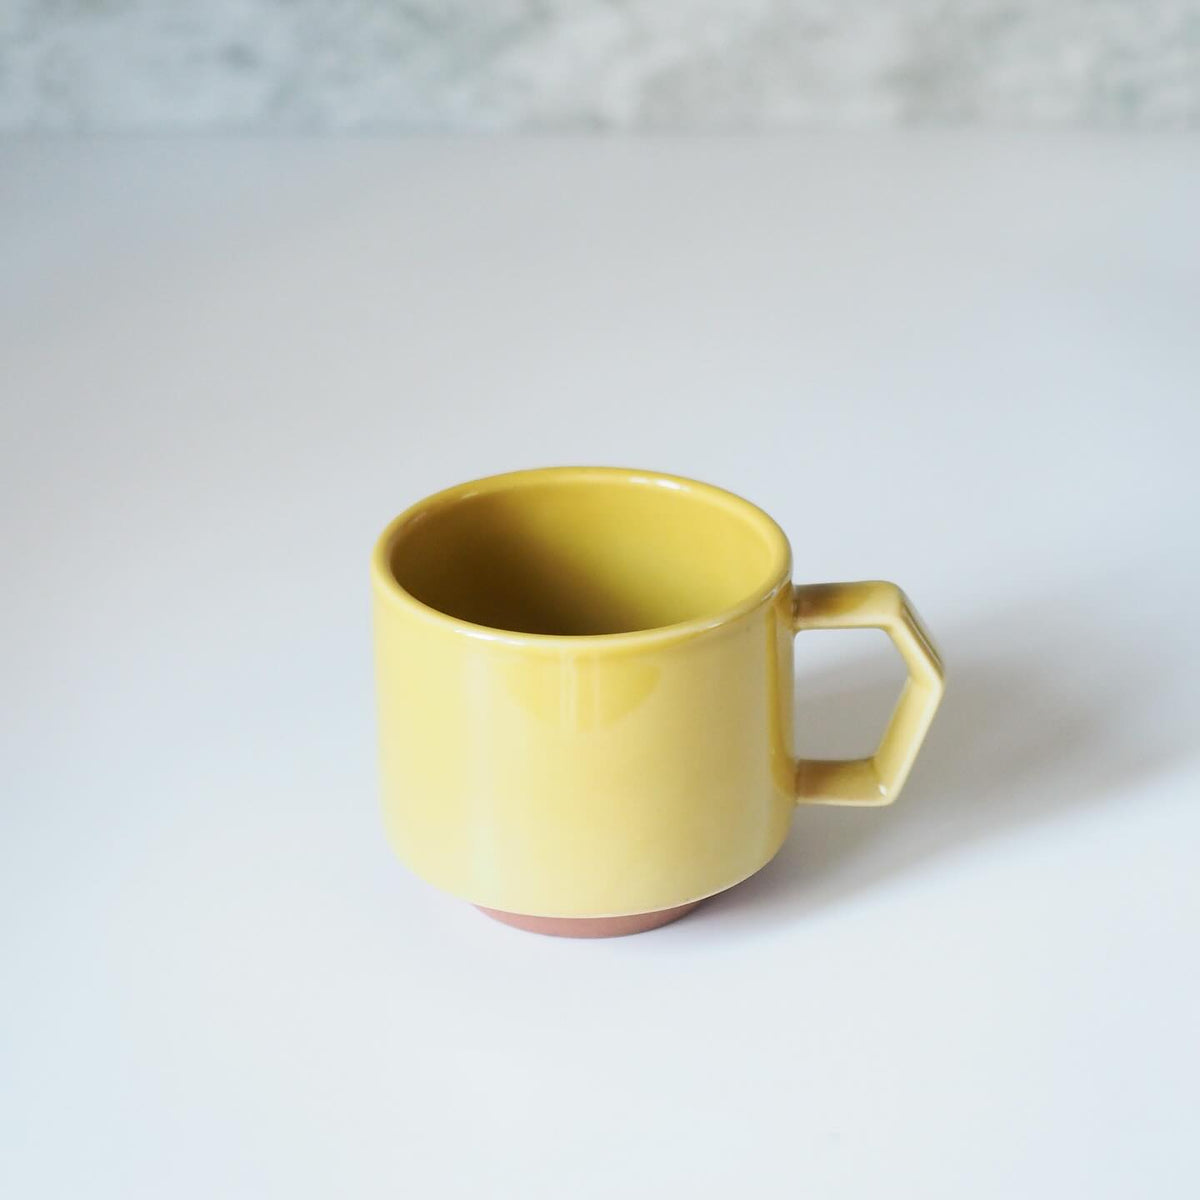 The Stacking Mug – Mustard by CHIPS Inc. sits elegantly on a white surface.